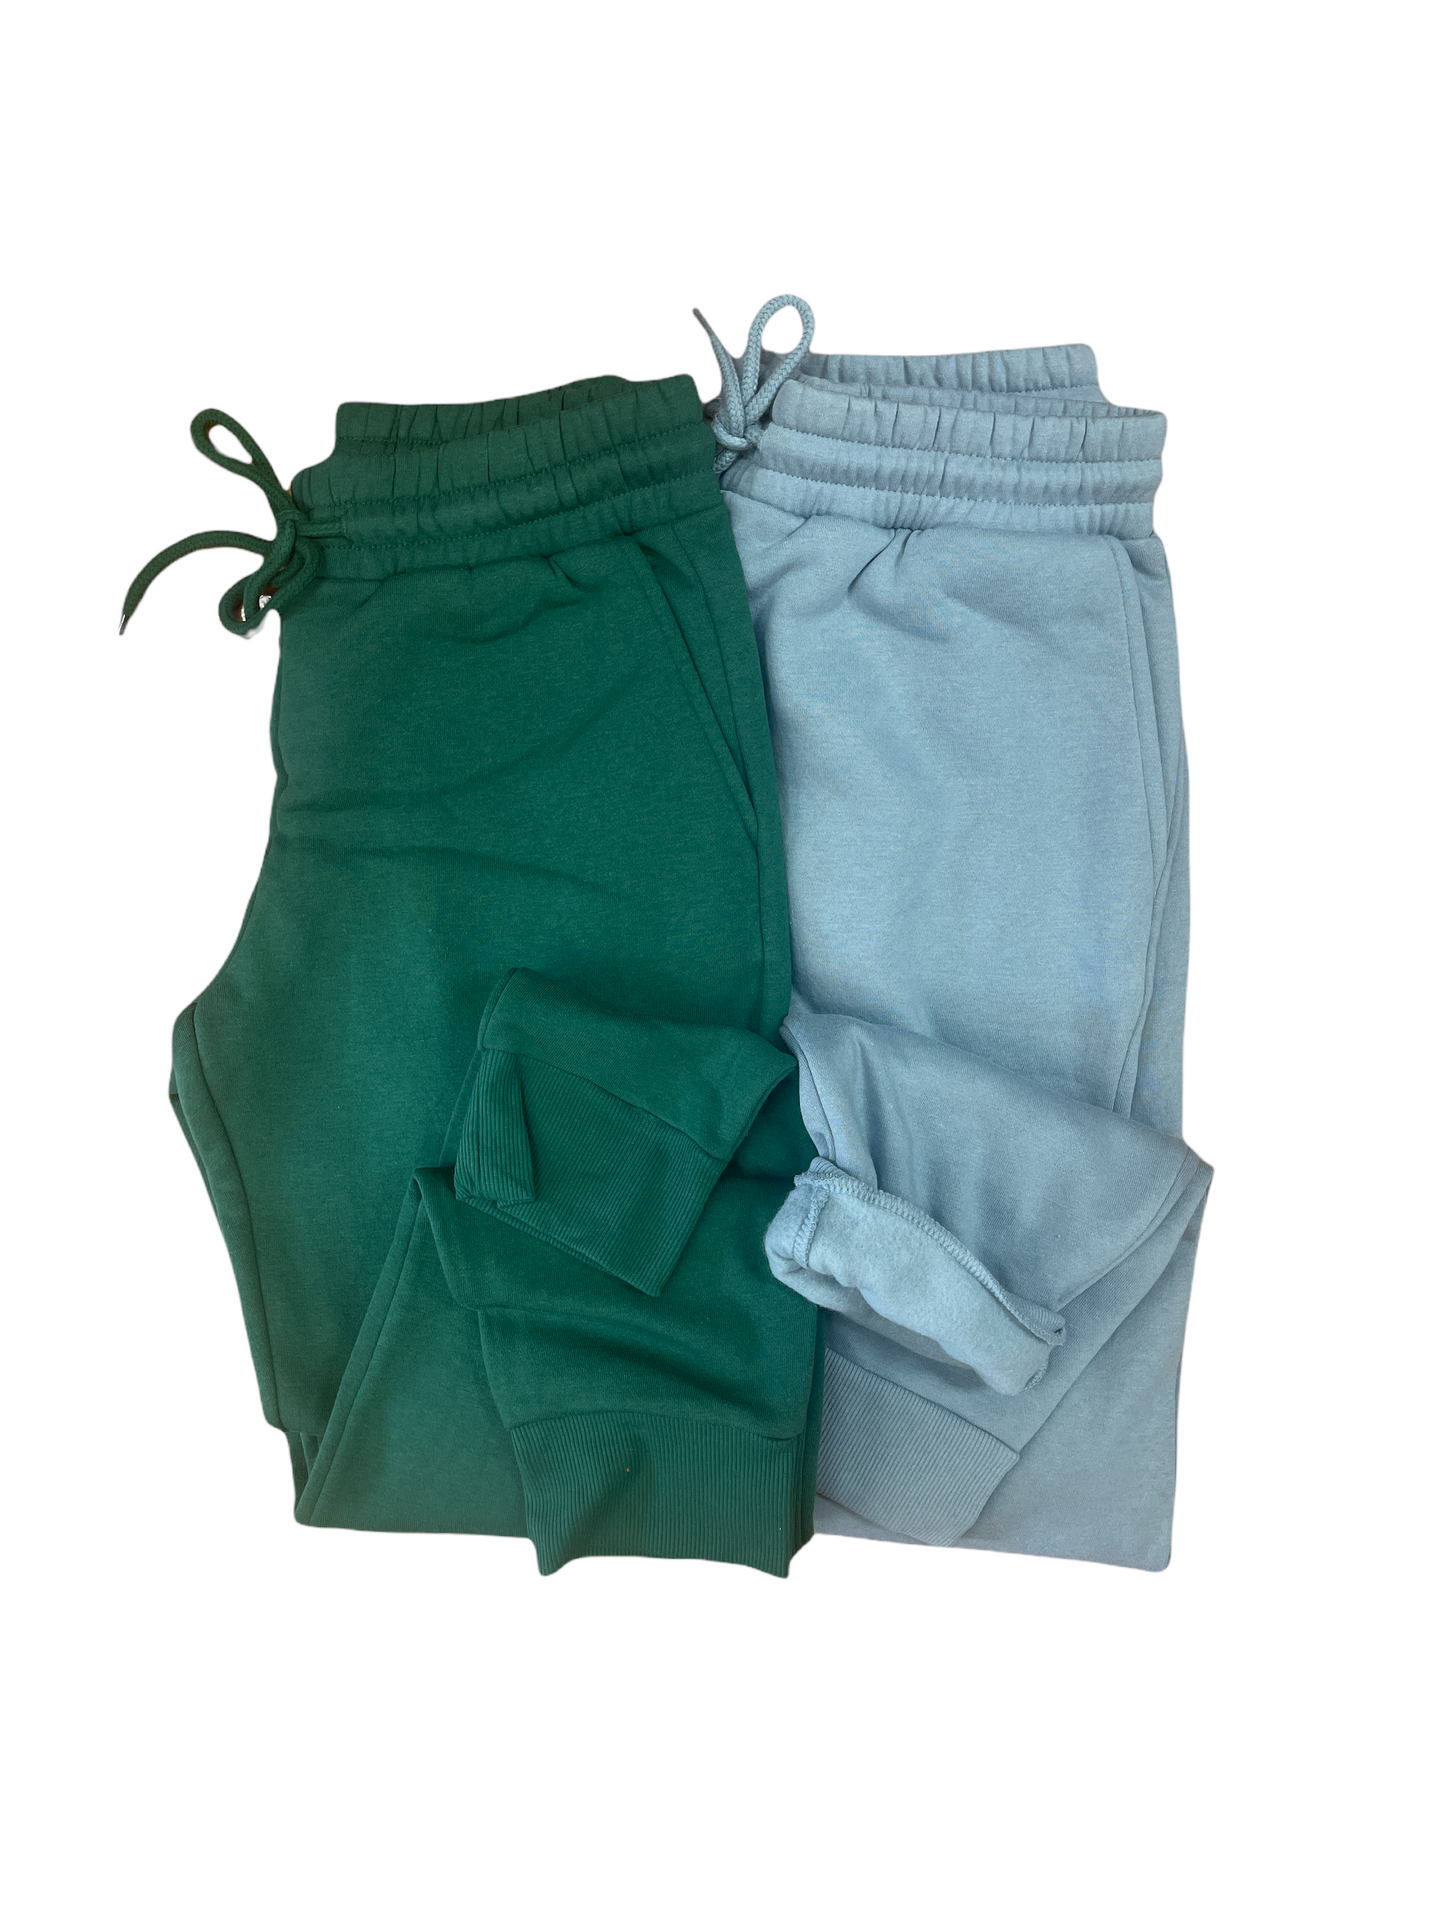 Tyler joggers (new colors)